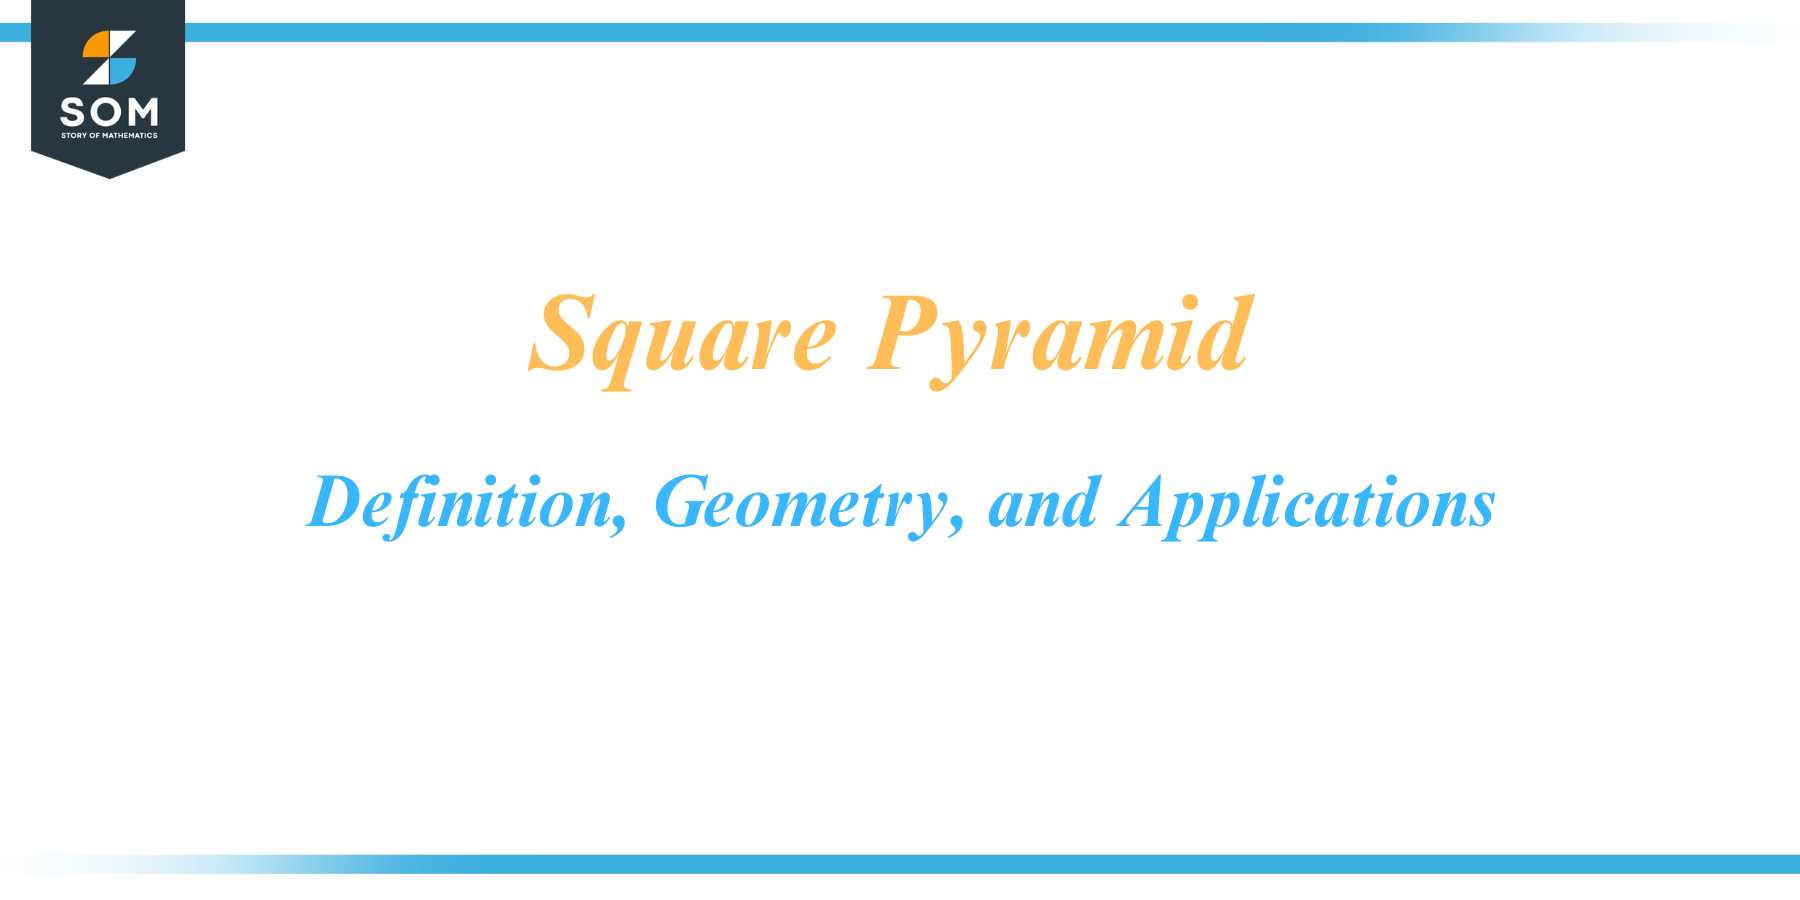 Square Pyramid Definition Geometry and Applications